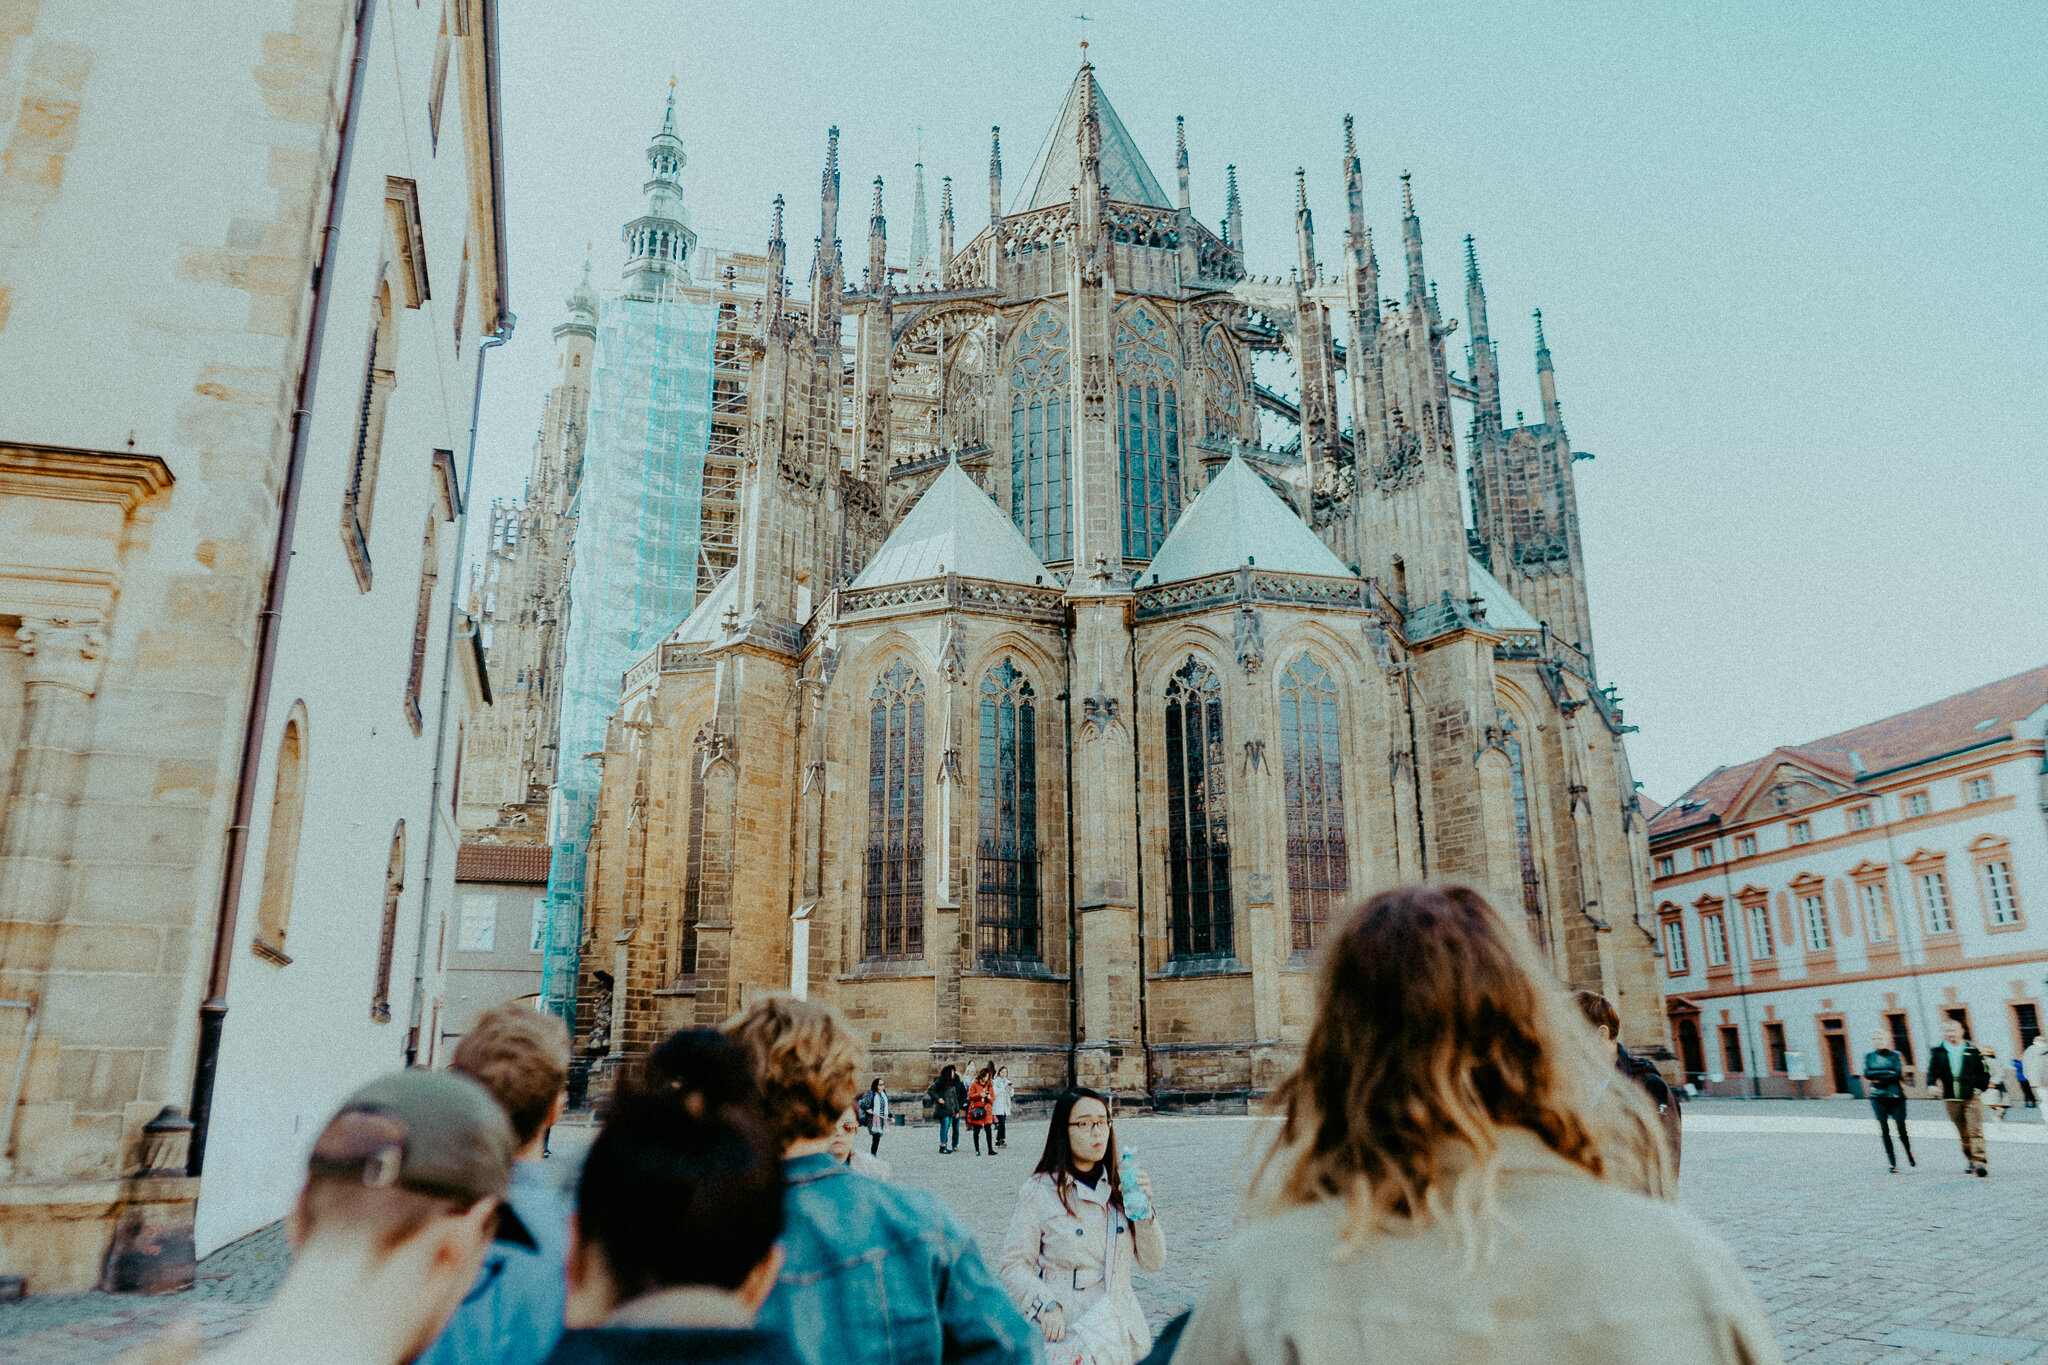 Checking out the cathedral in Prague.